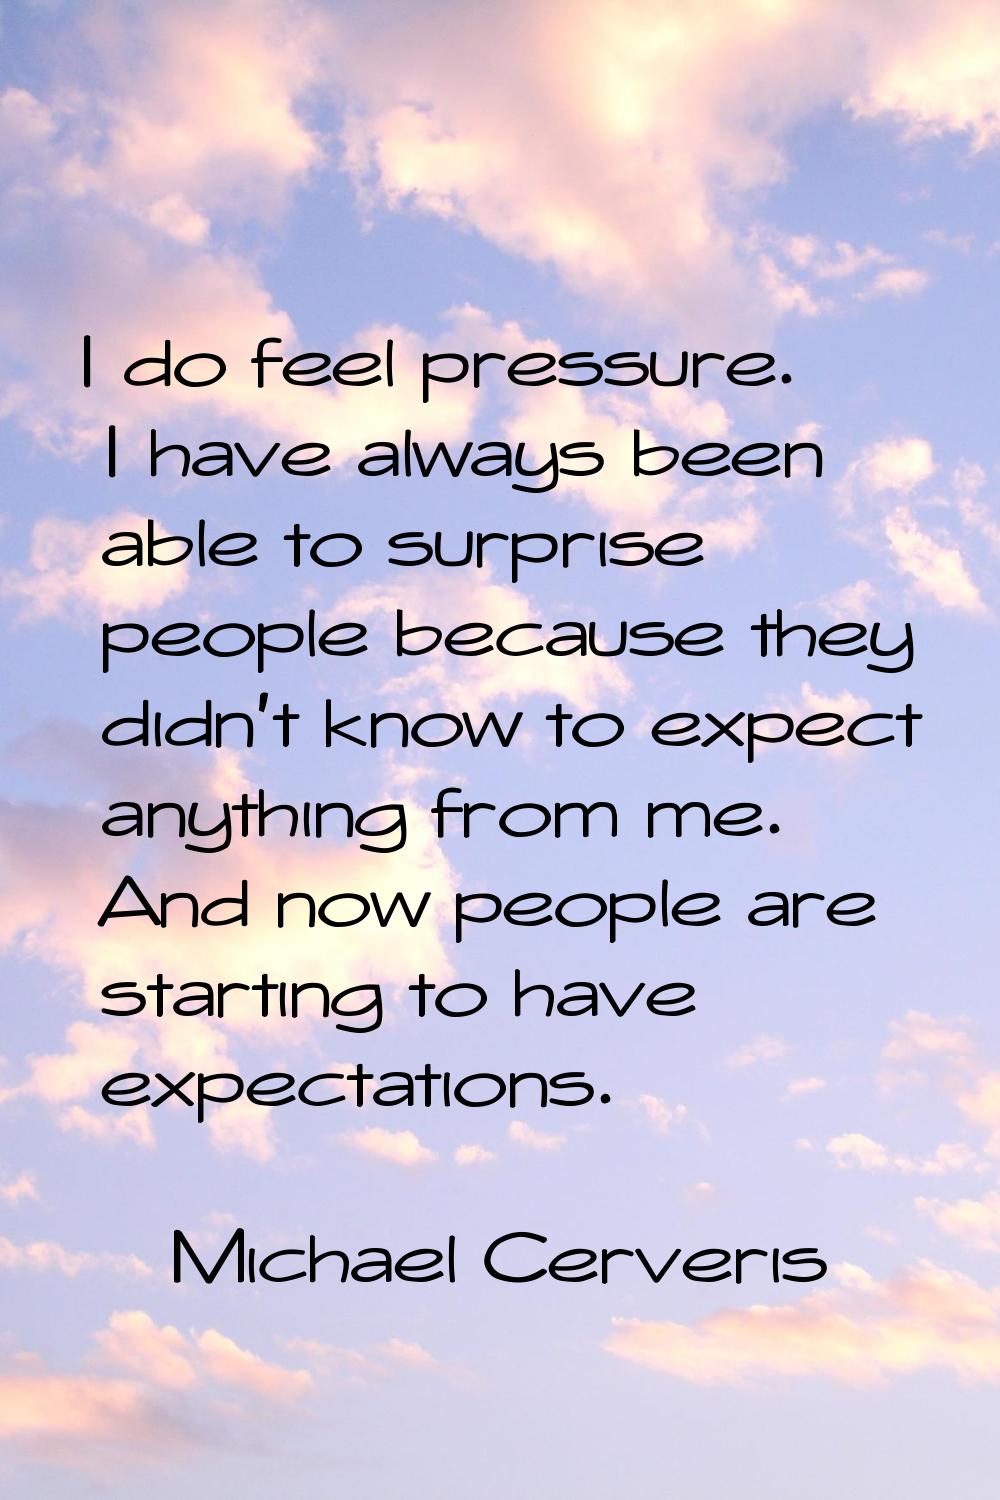 I do feel pressure. I have always been able to surprise people because they didn't know to expect a